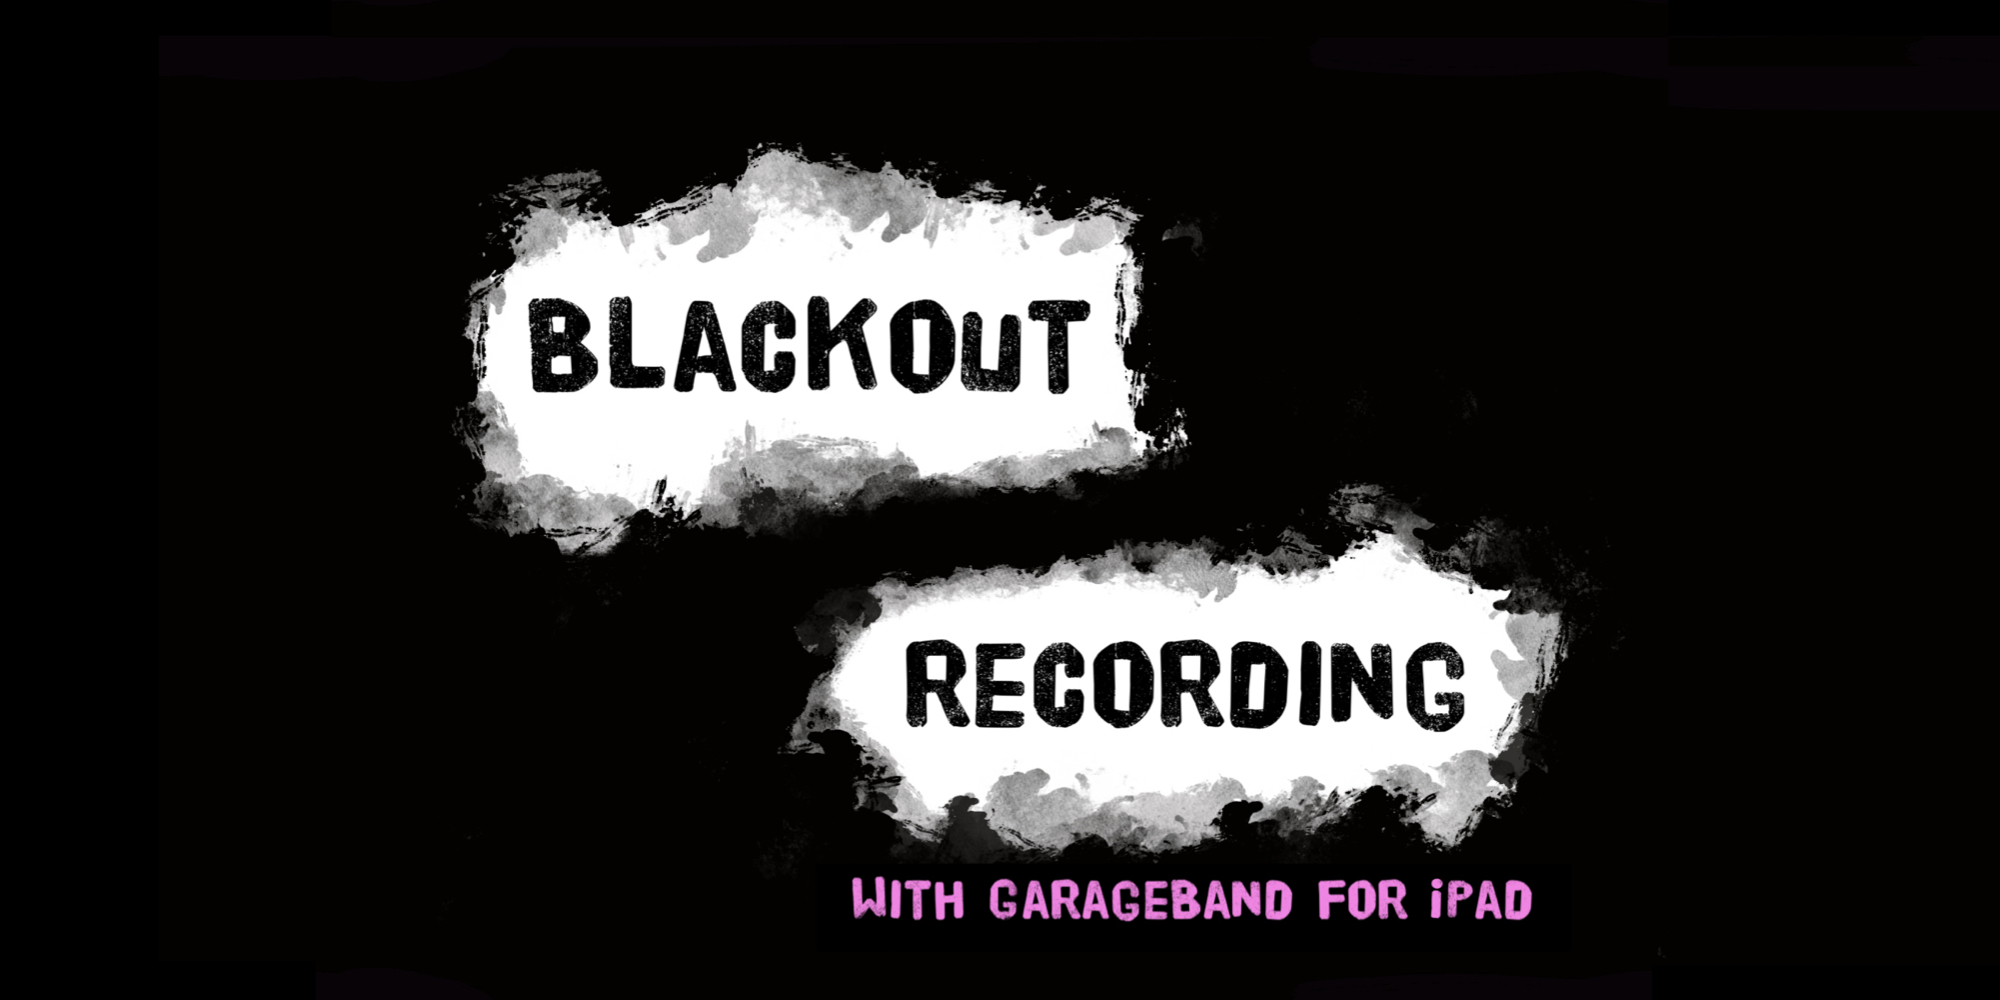 Blackout Recording with GarageBand for iPad. Book cover. Black text on white cutout areas, against a black background.